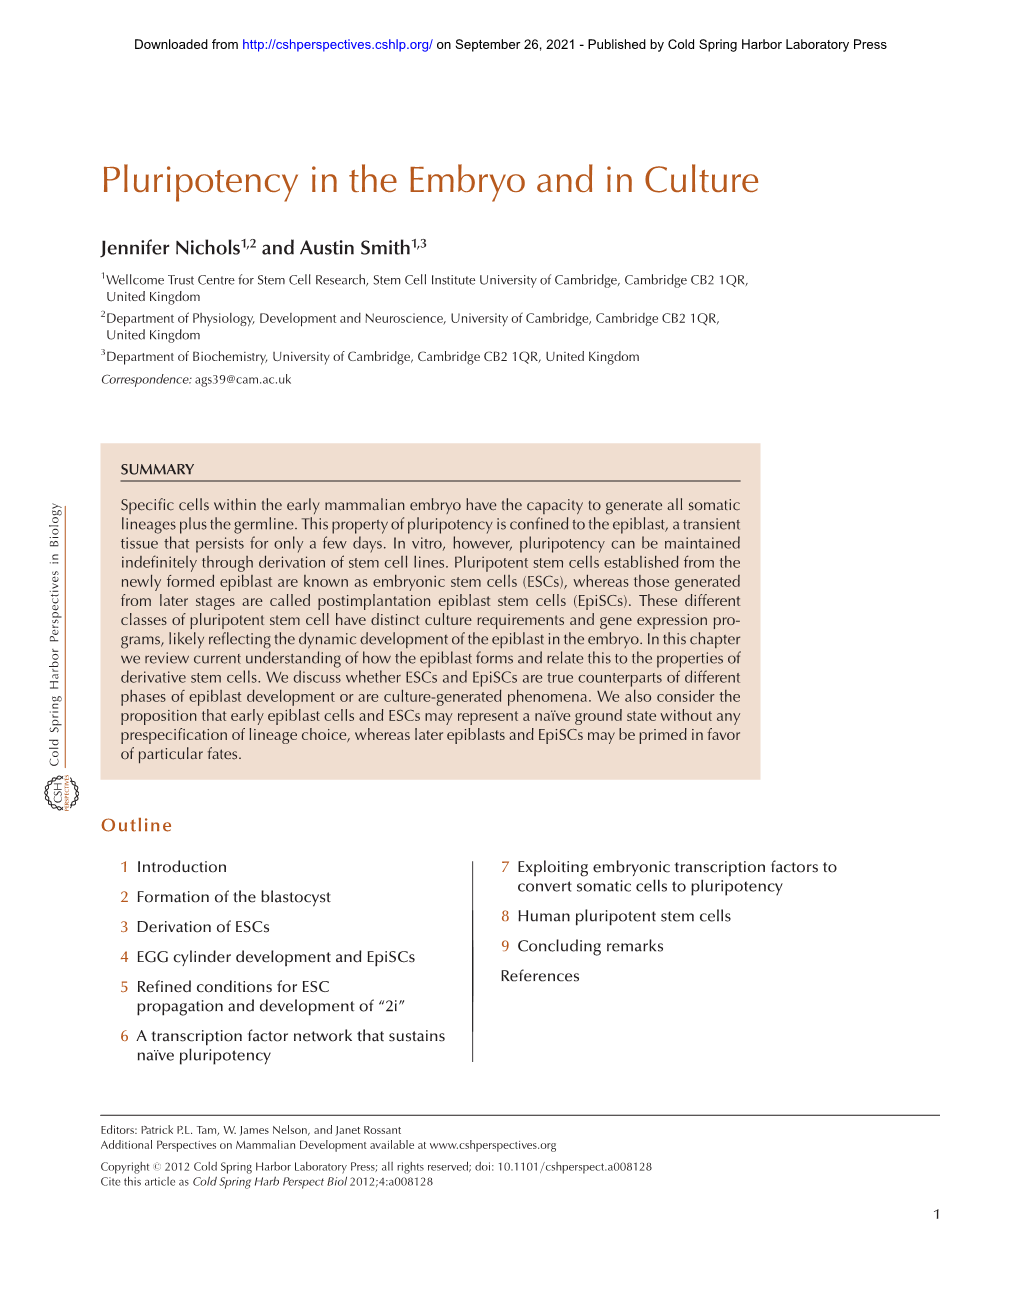 Pluripotency in the Embryo and in Culture